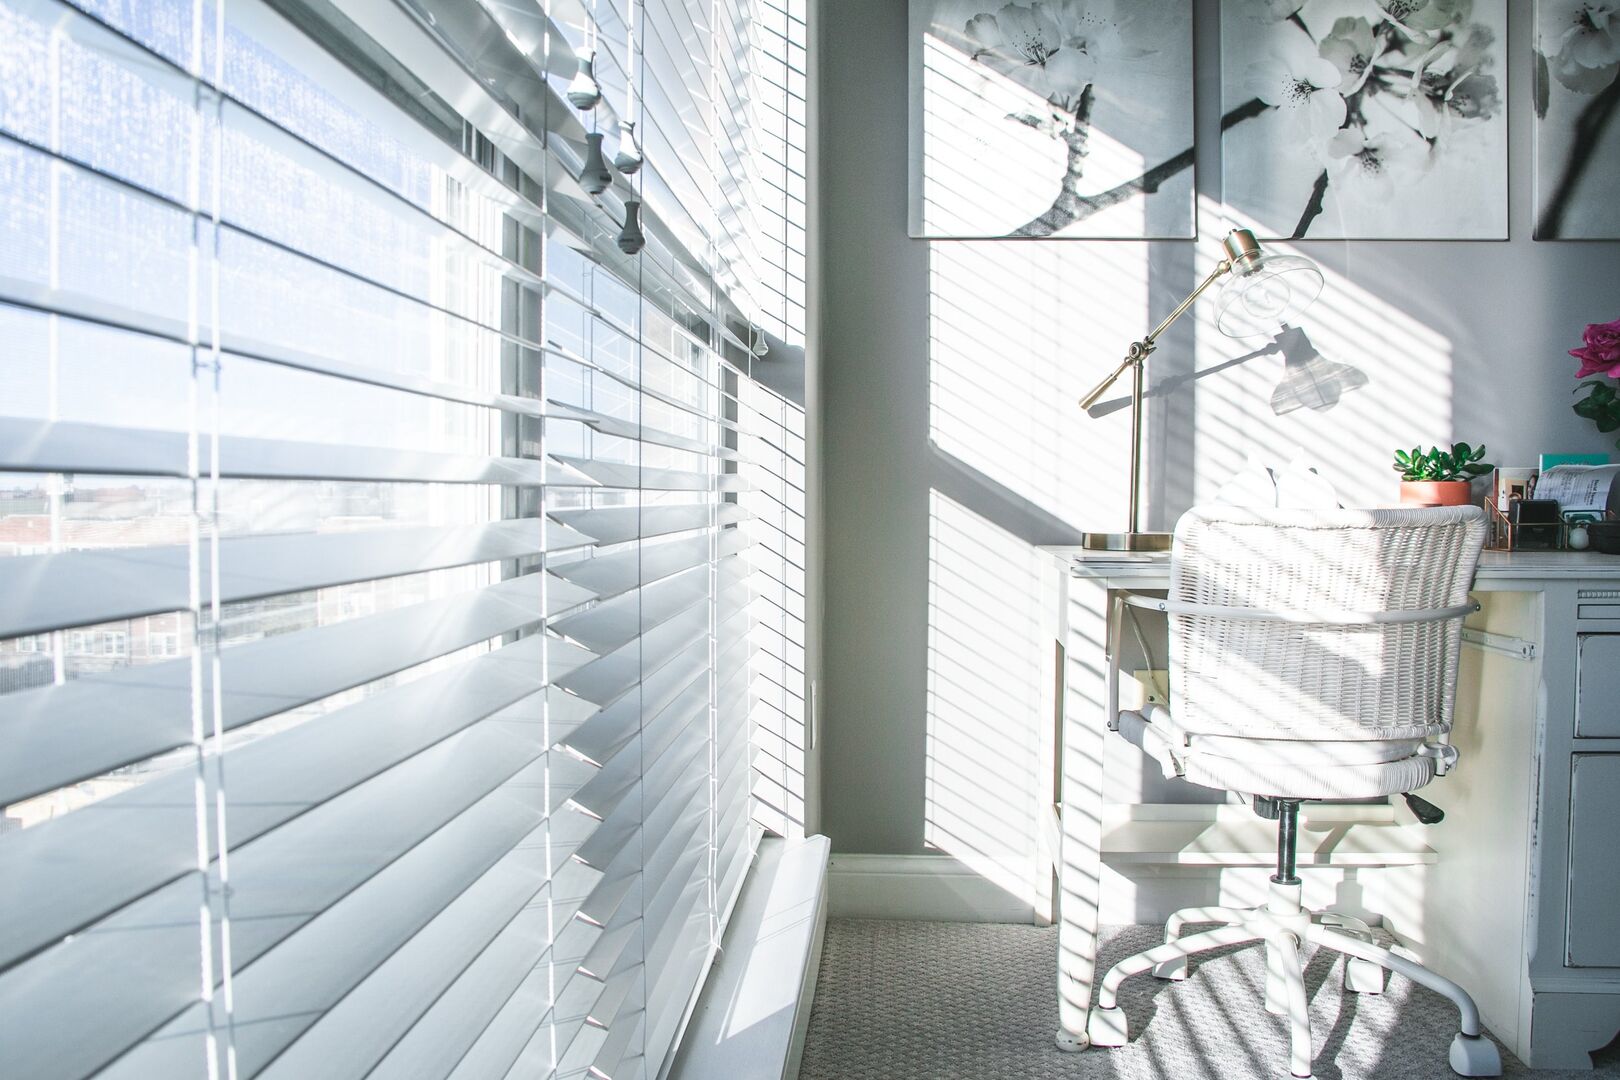 Closeup photo of window blinds with light shining through